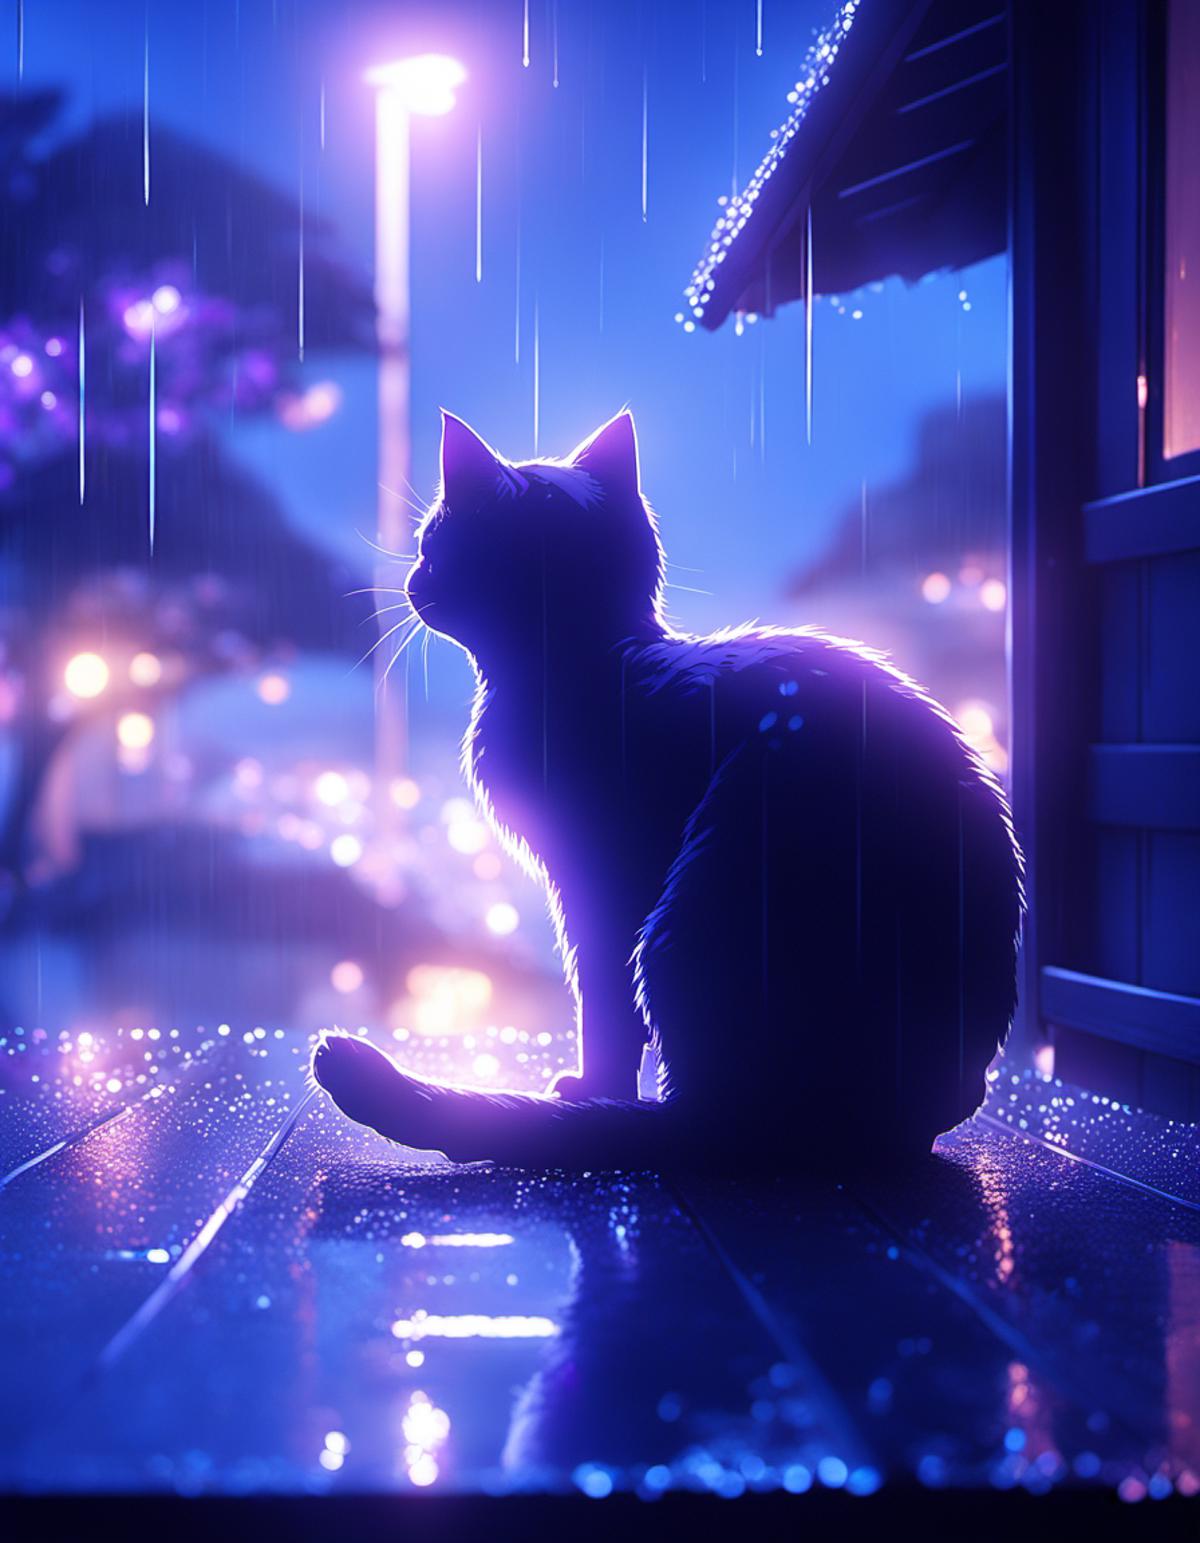 A black cat sitting on a wooden floor in the rain at night.